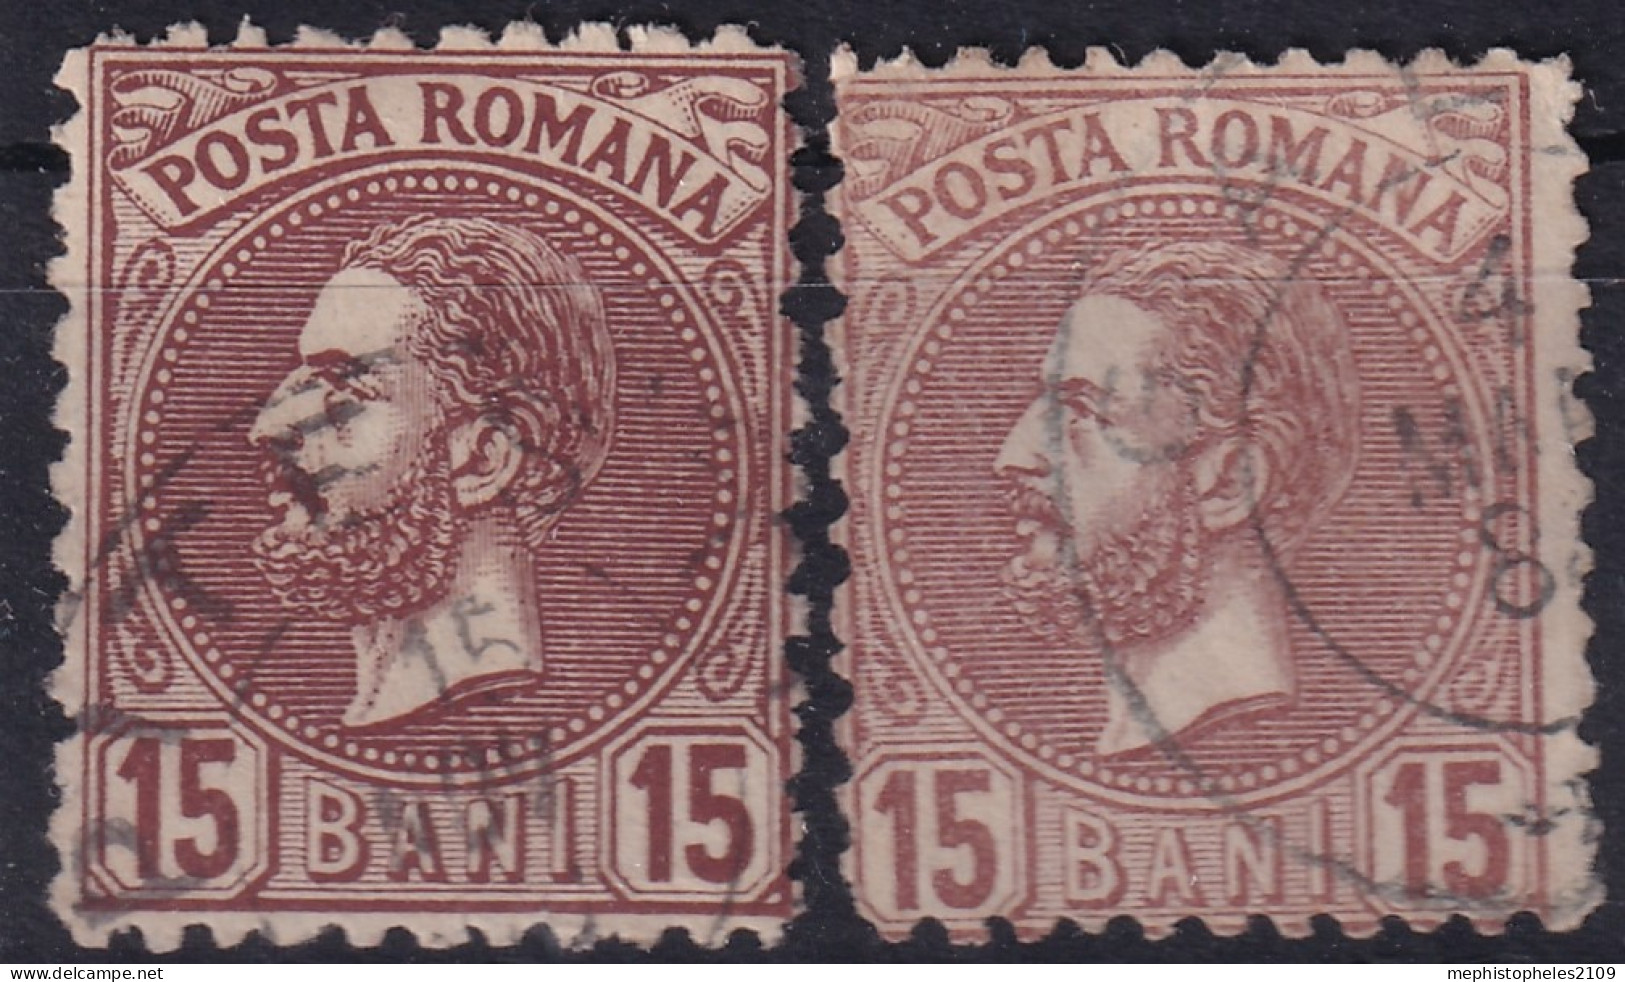 ROMANIA 1880 - Canceled - Sc# 74 - Perf. 11, 11 1/2 - Used Stamps